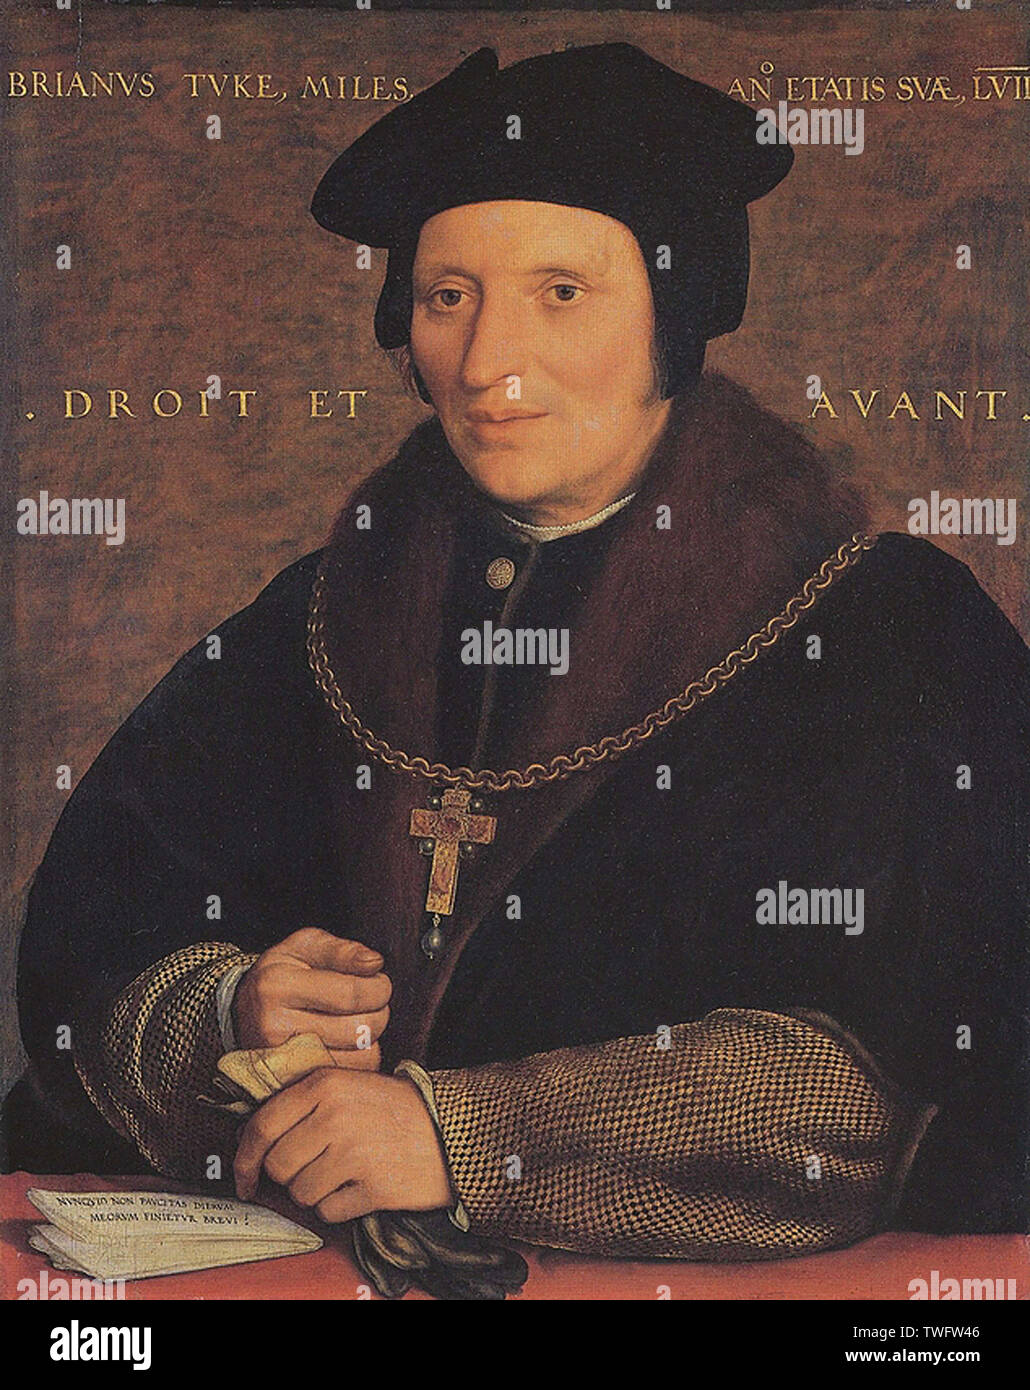 Hans Holbein the Younger - Portrait Sir Brian Tuke C 1527 Stock Photo